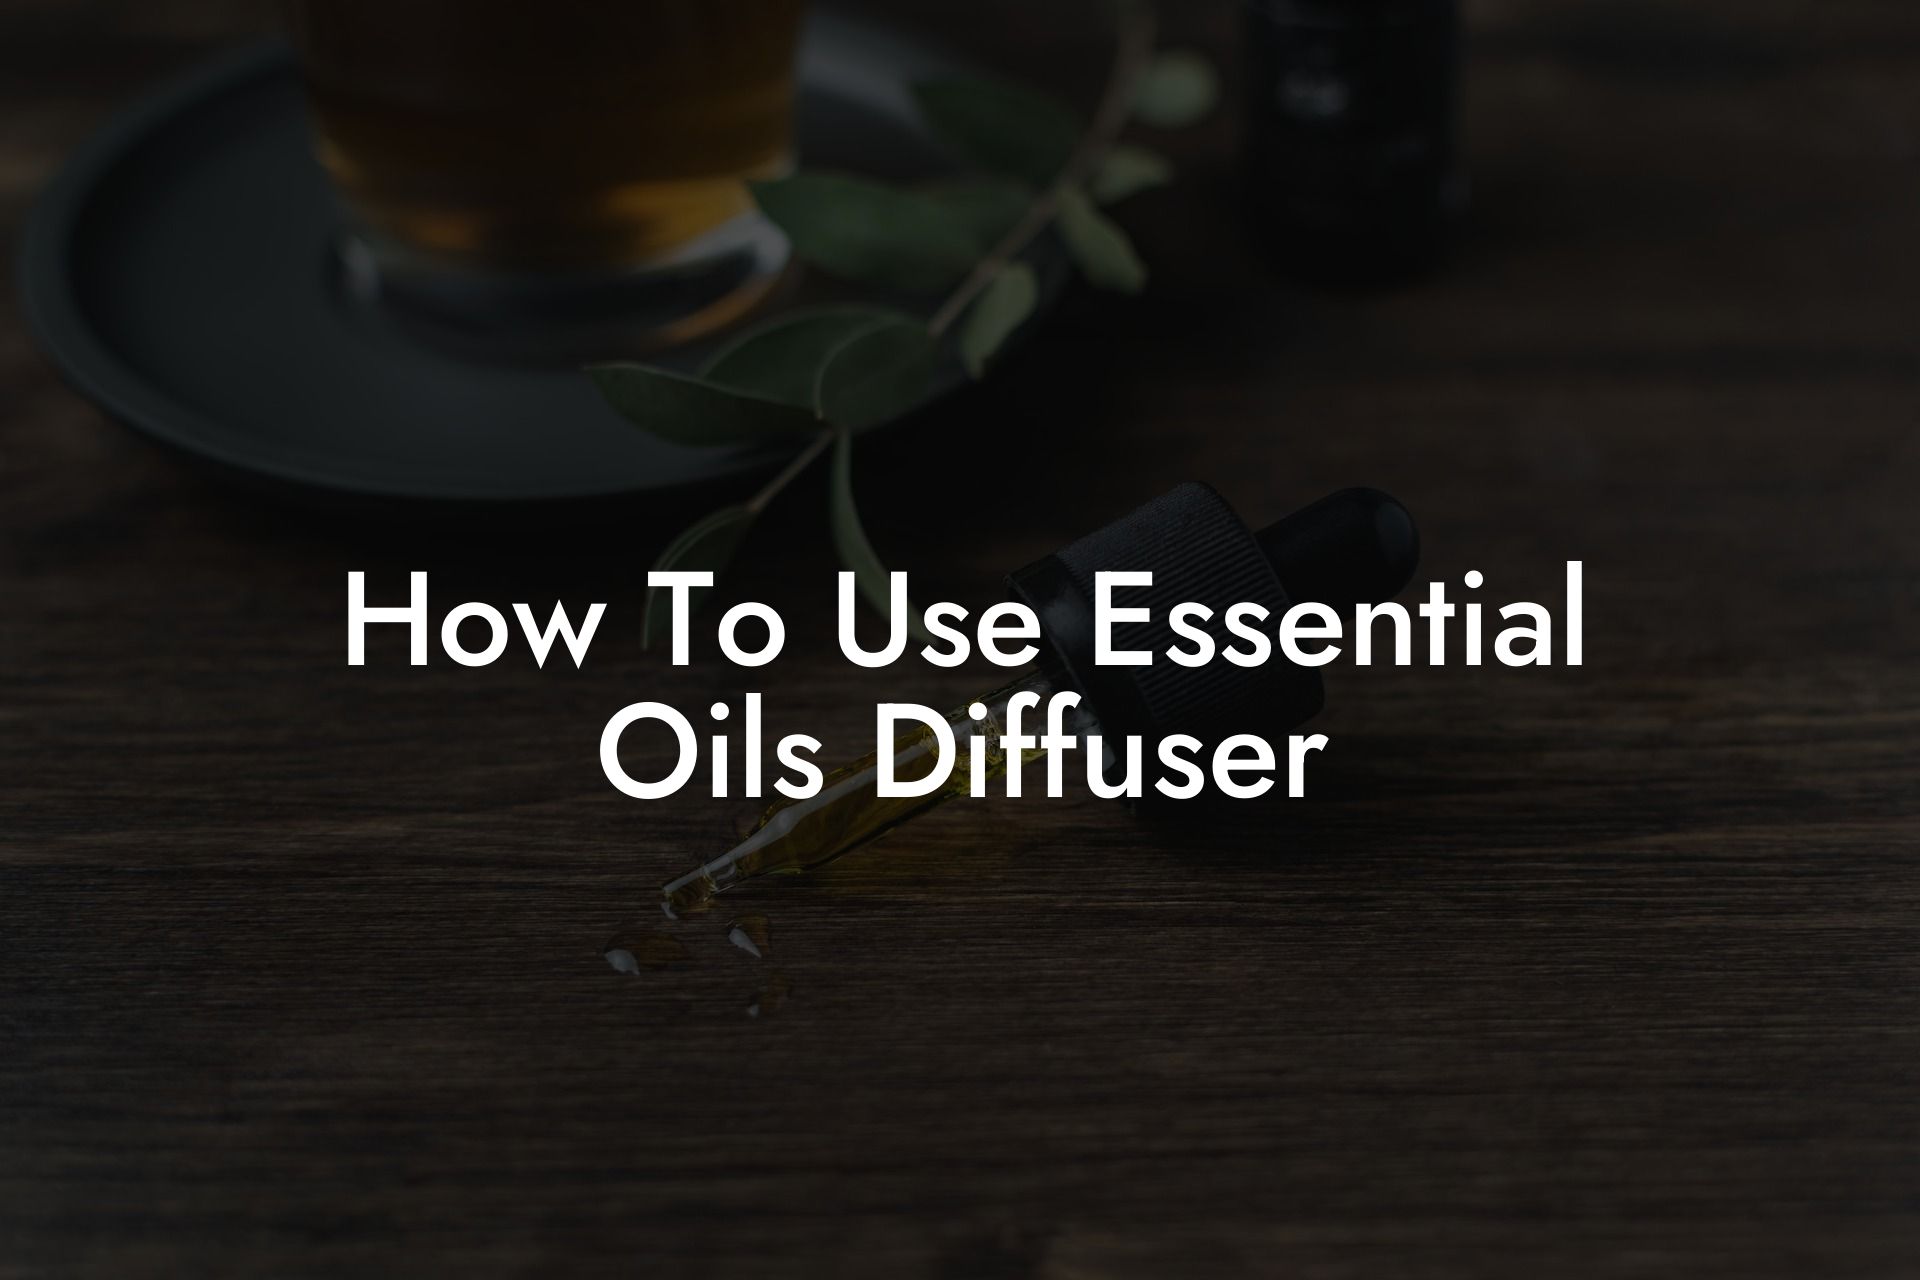 How To Use Essential Oils Diffuser